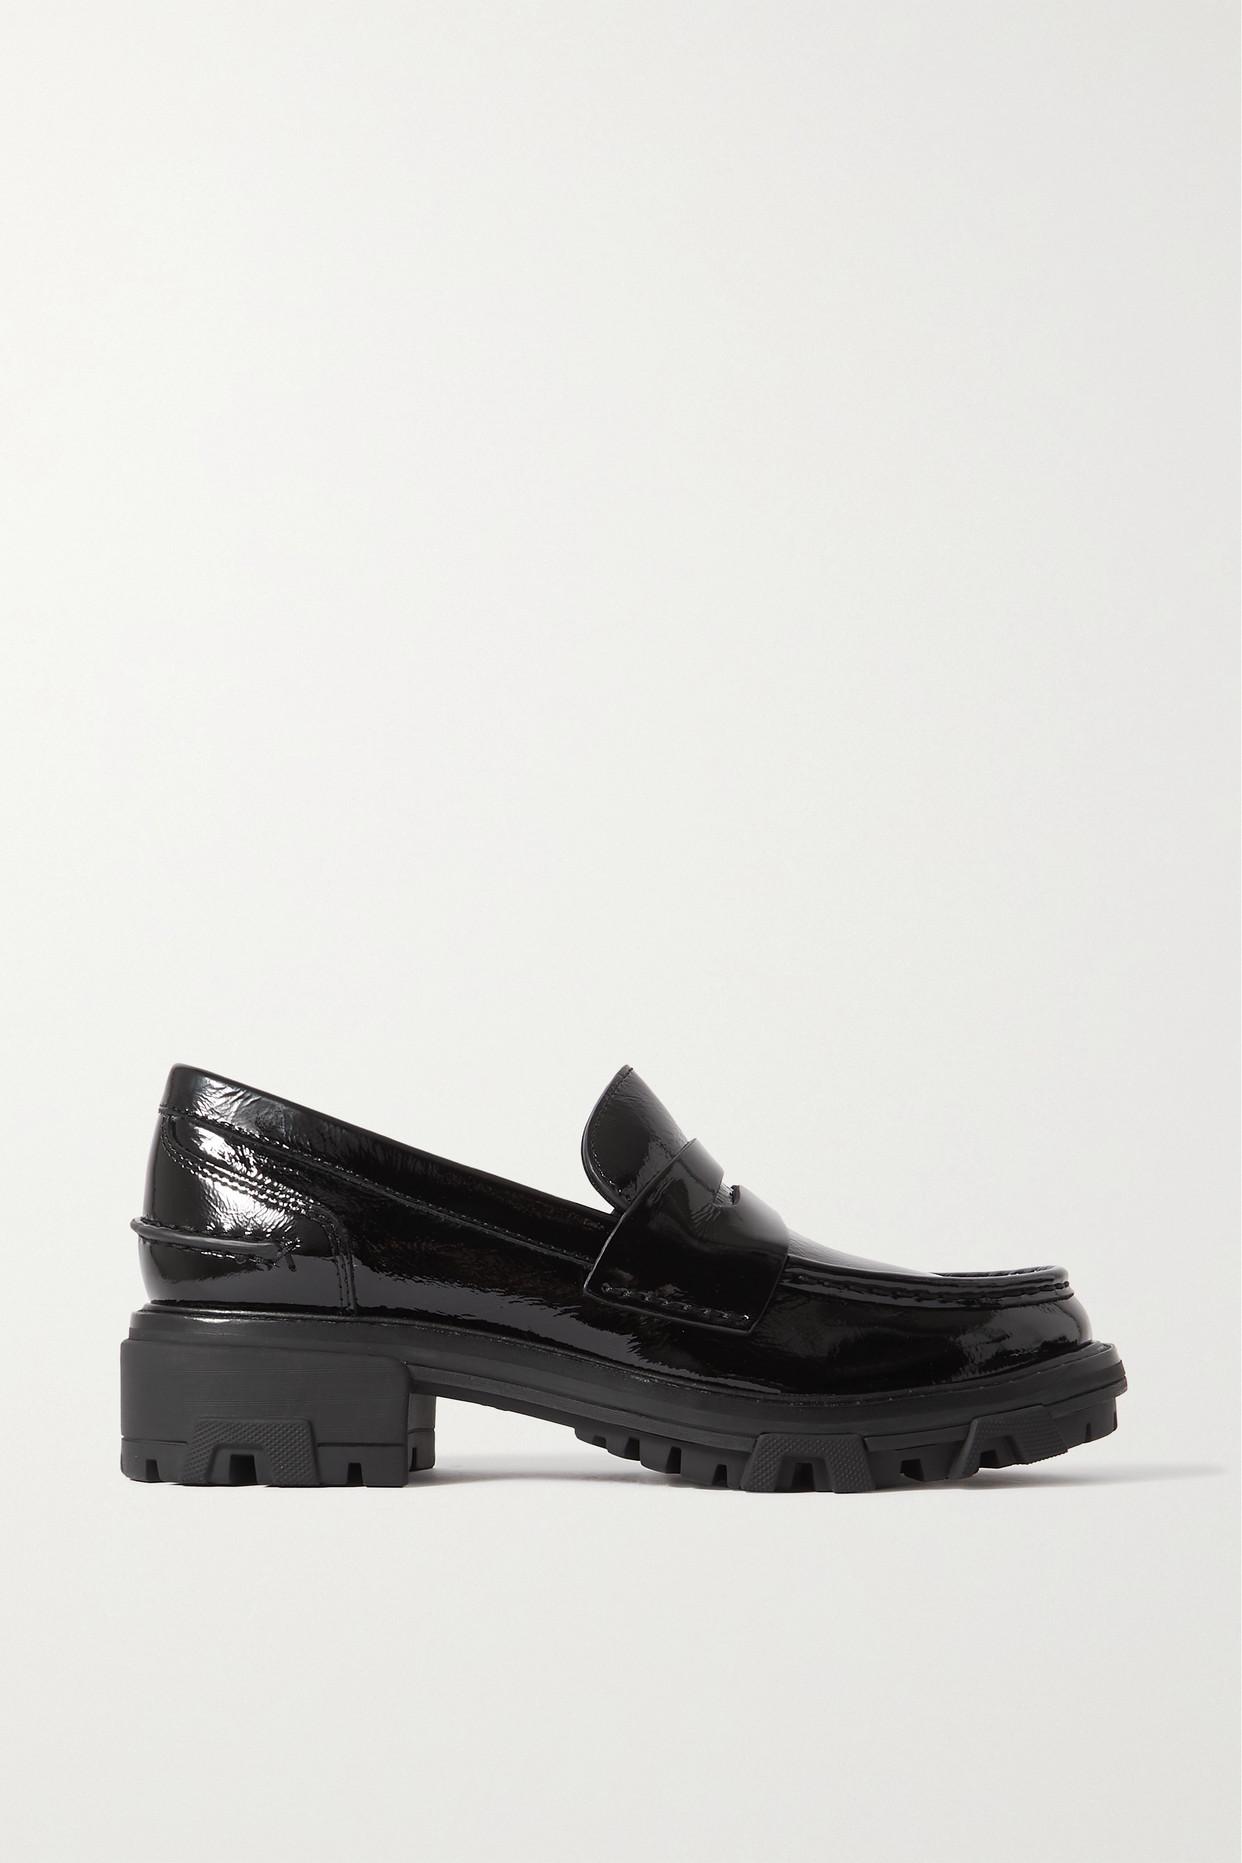 Rag & Bone Shiloh Patent-leather Loafers in Black | Lyst